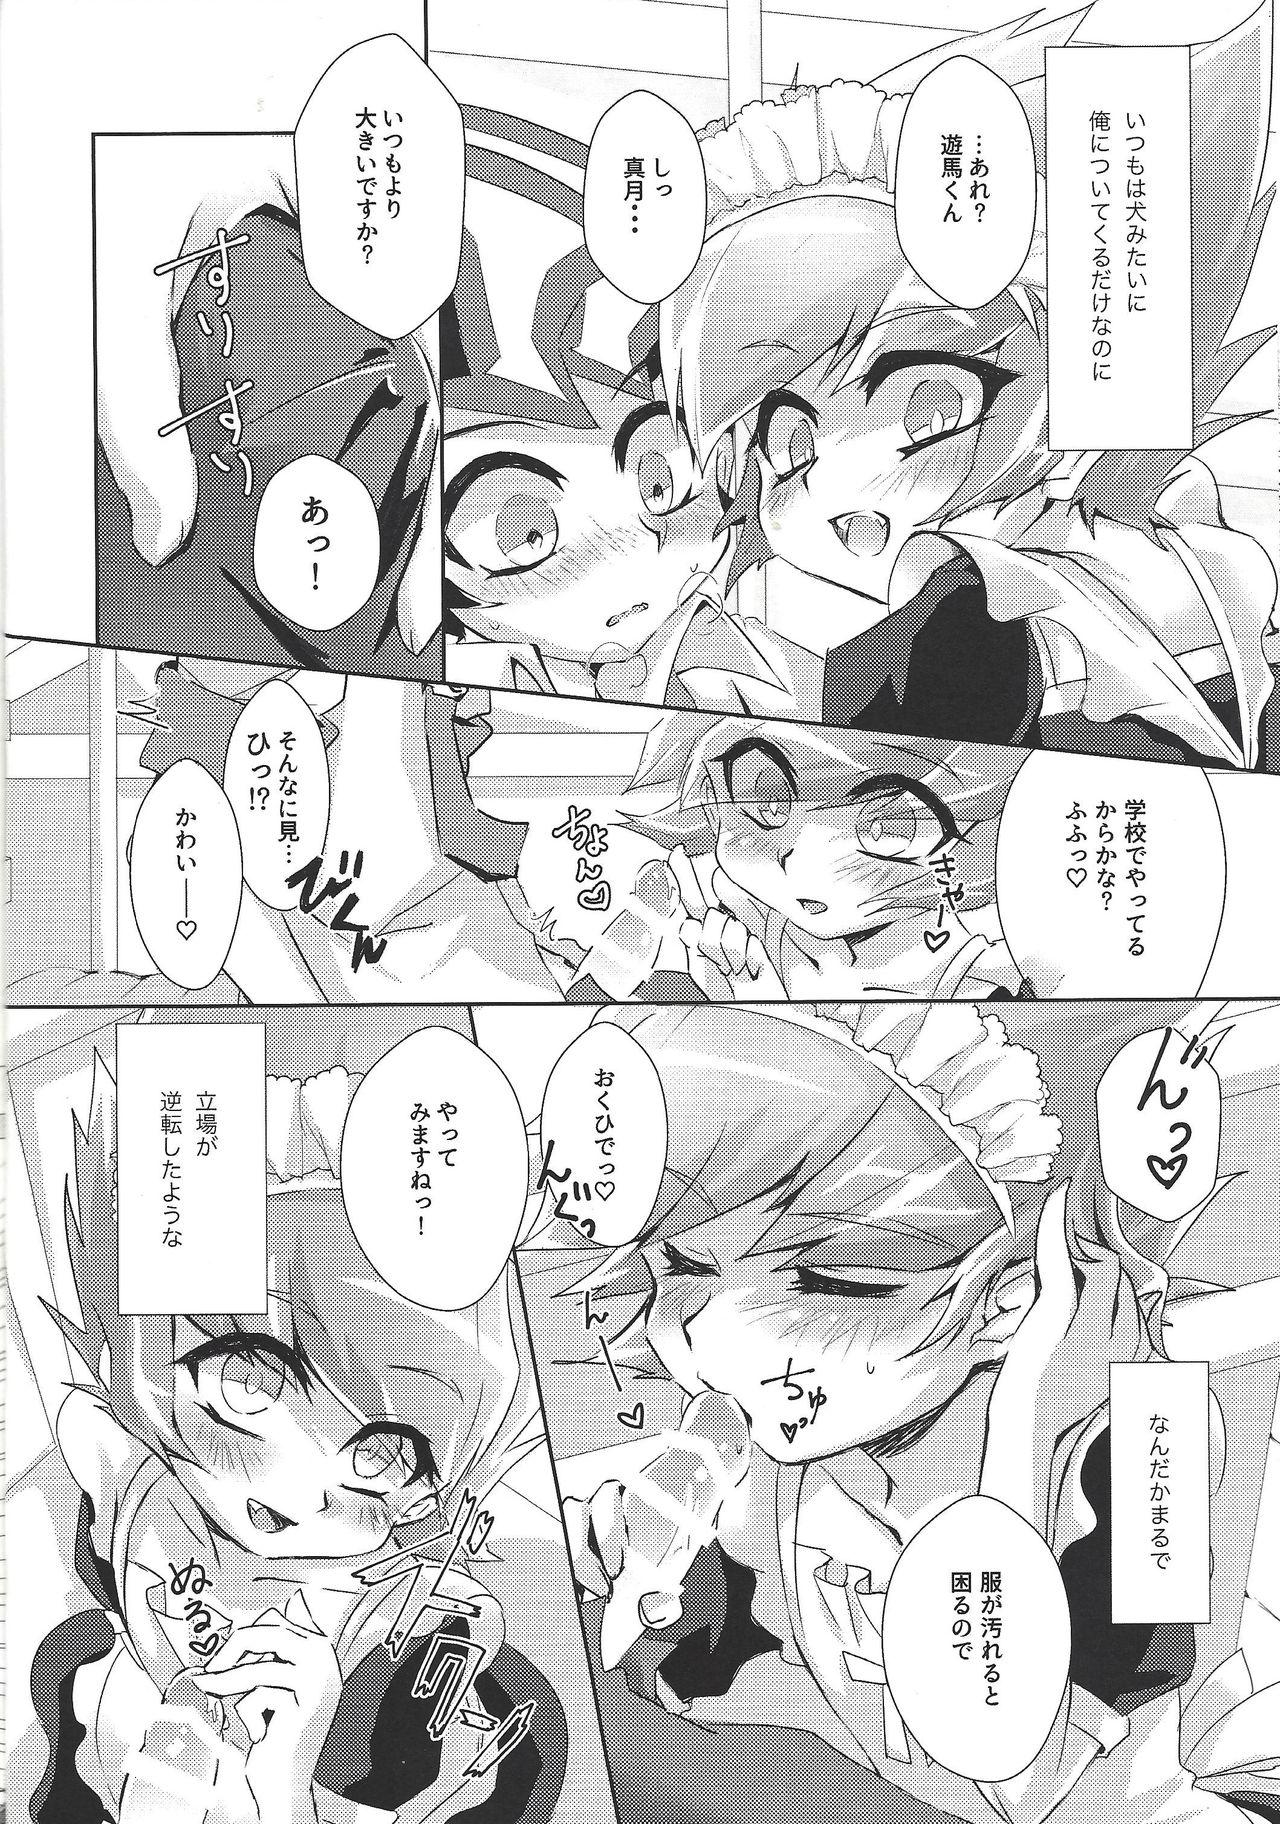 Caught Stand by me - Yu-gi-oh zexal Gay 3some - Page 9